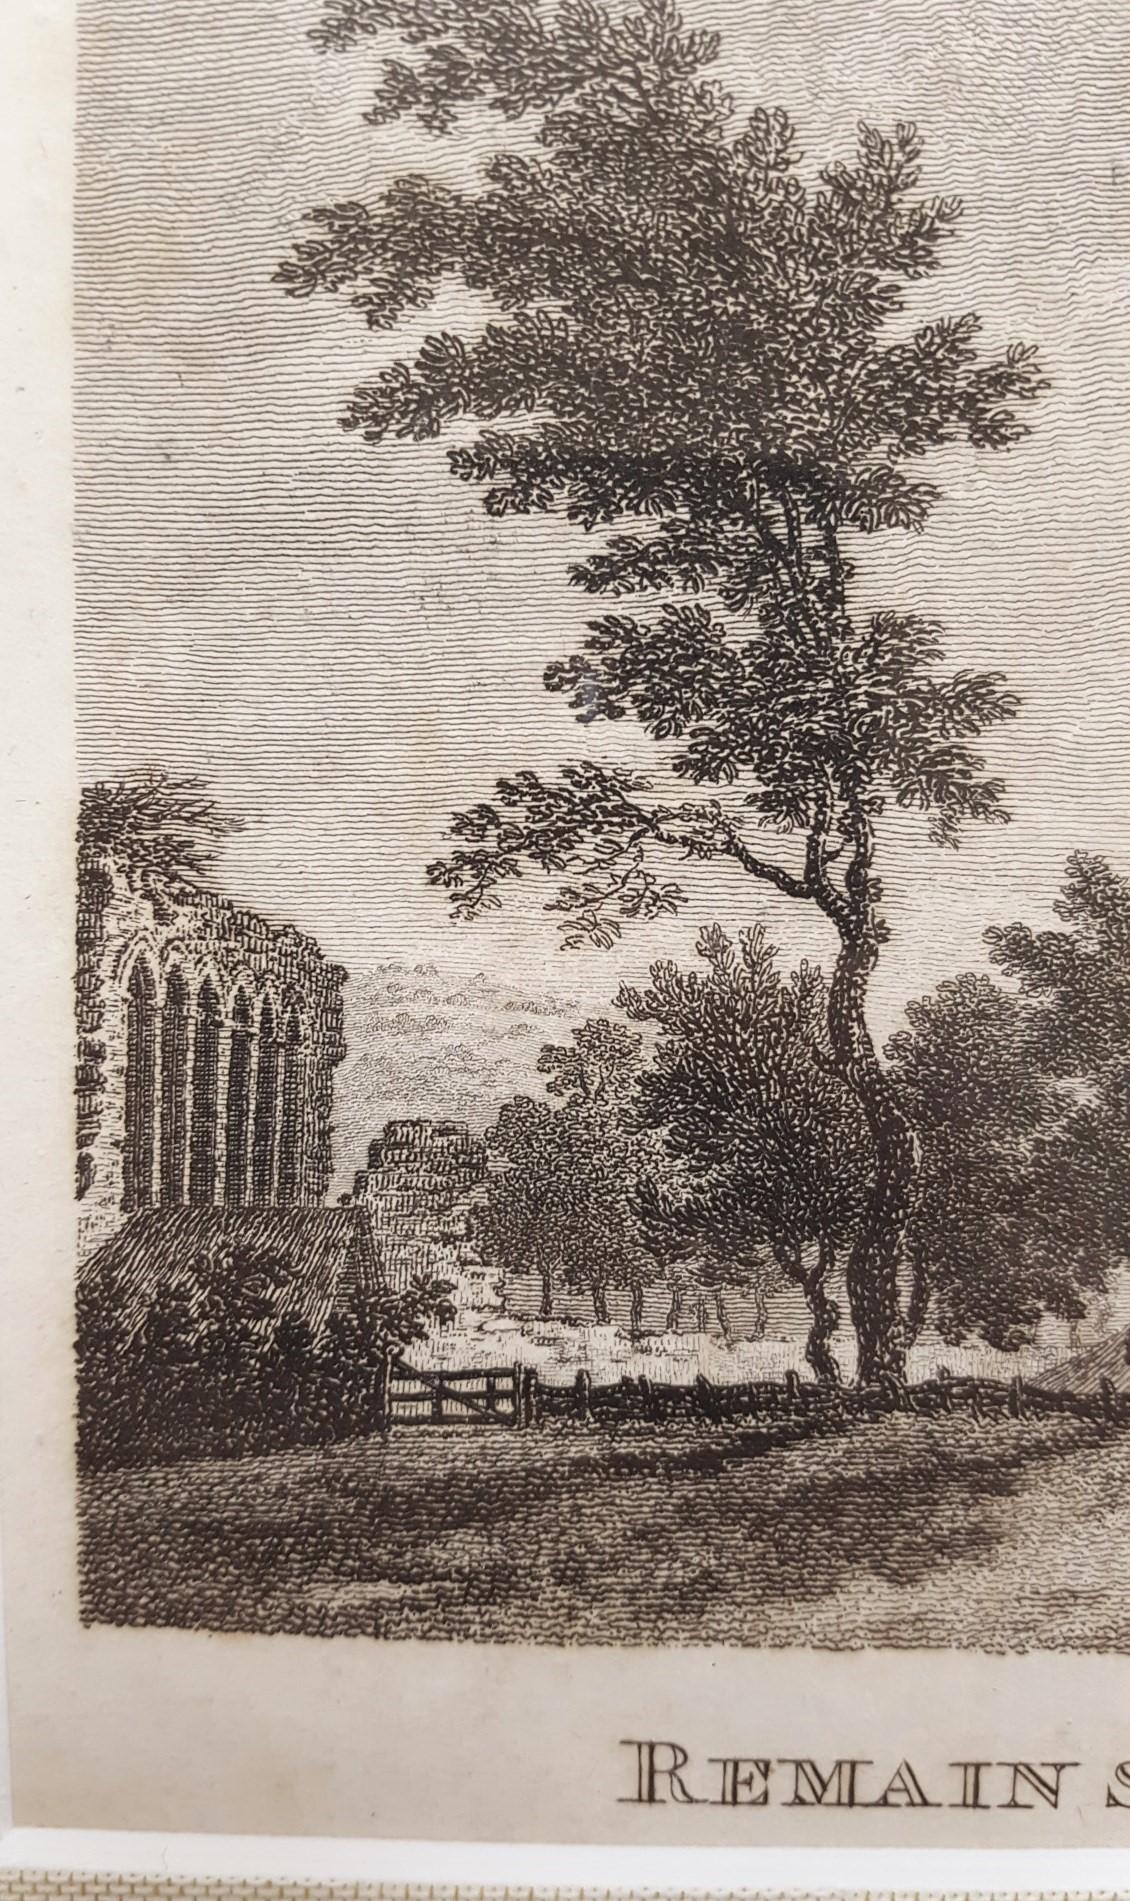 An original copper plate engraving on wove paper by English artist James Caldwell (18th Century) titled 